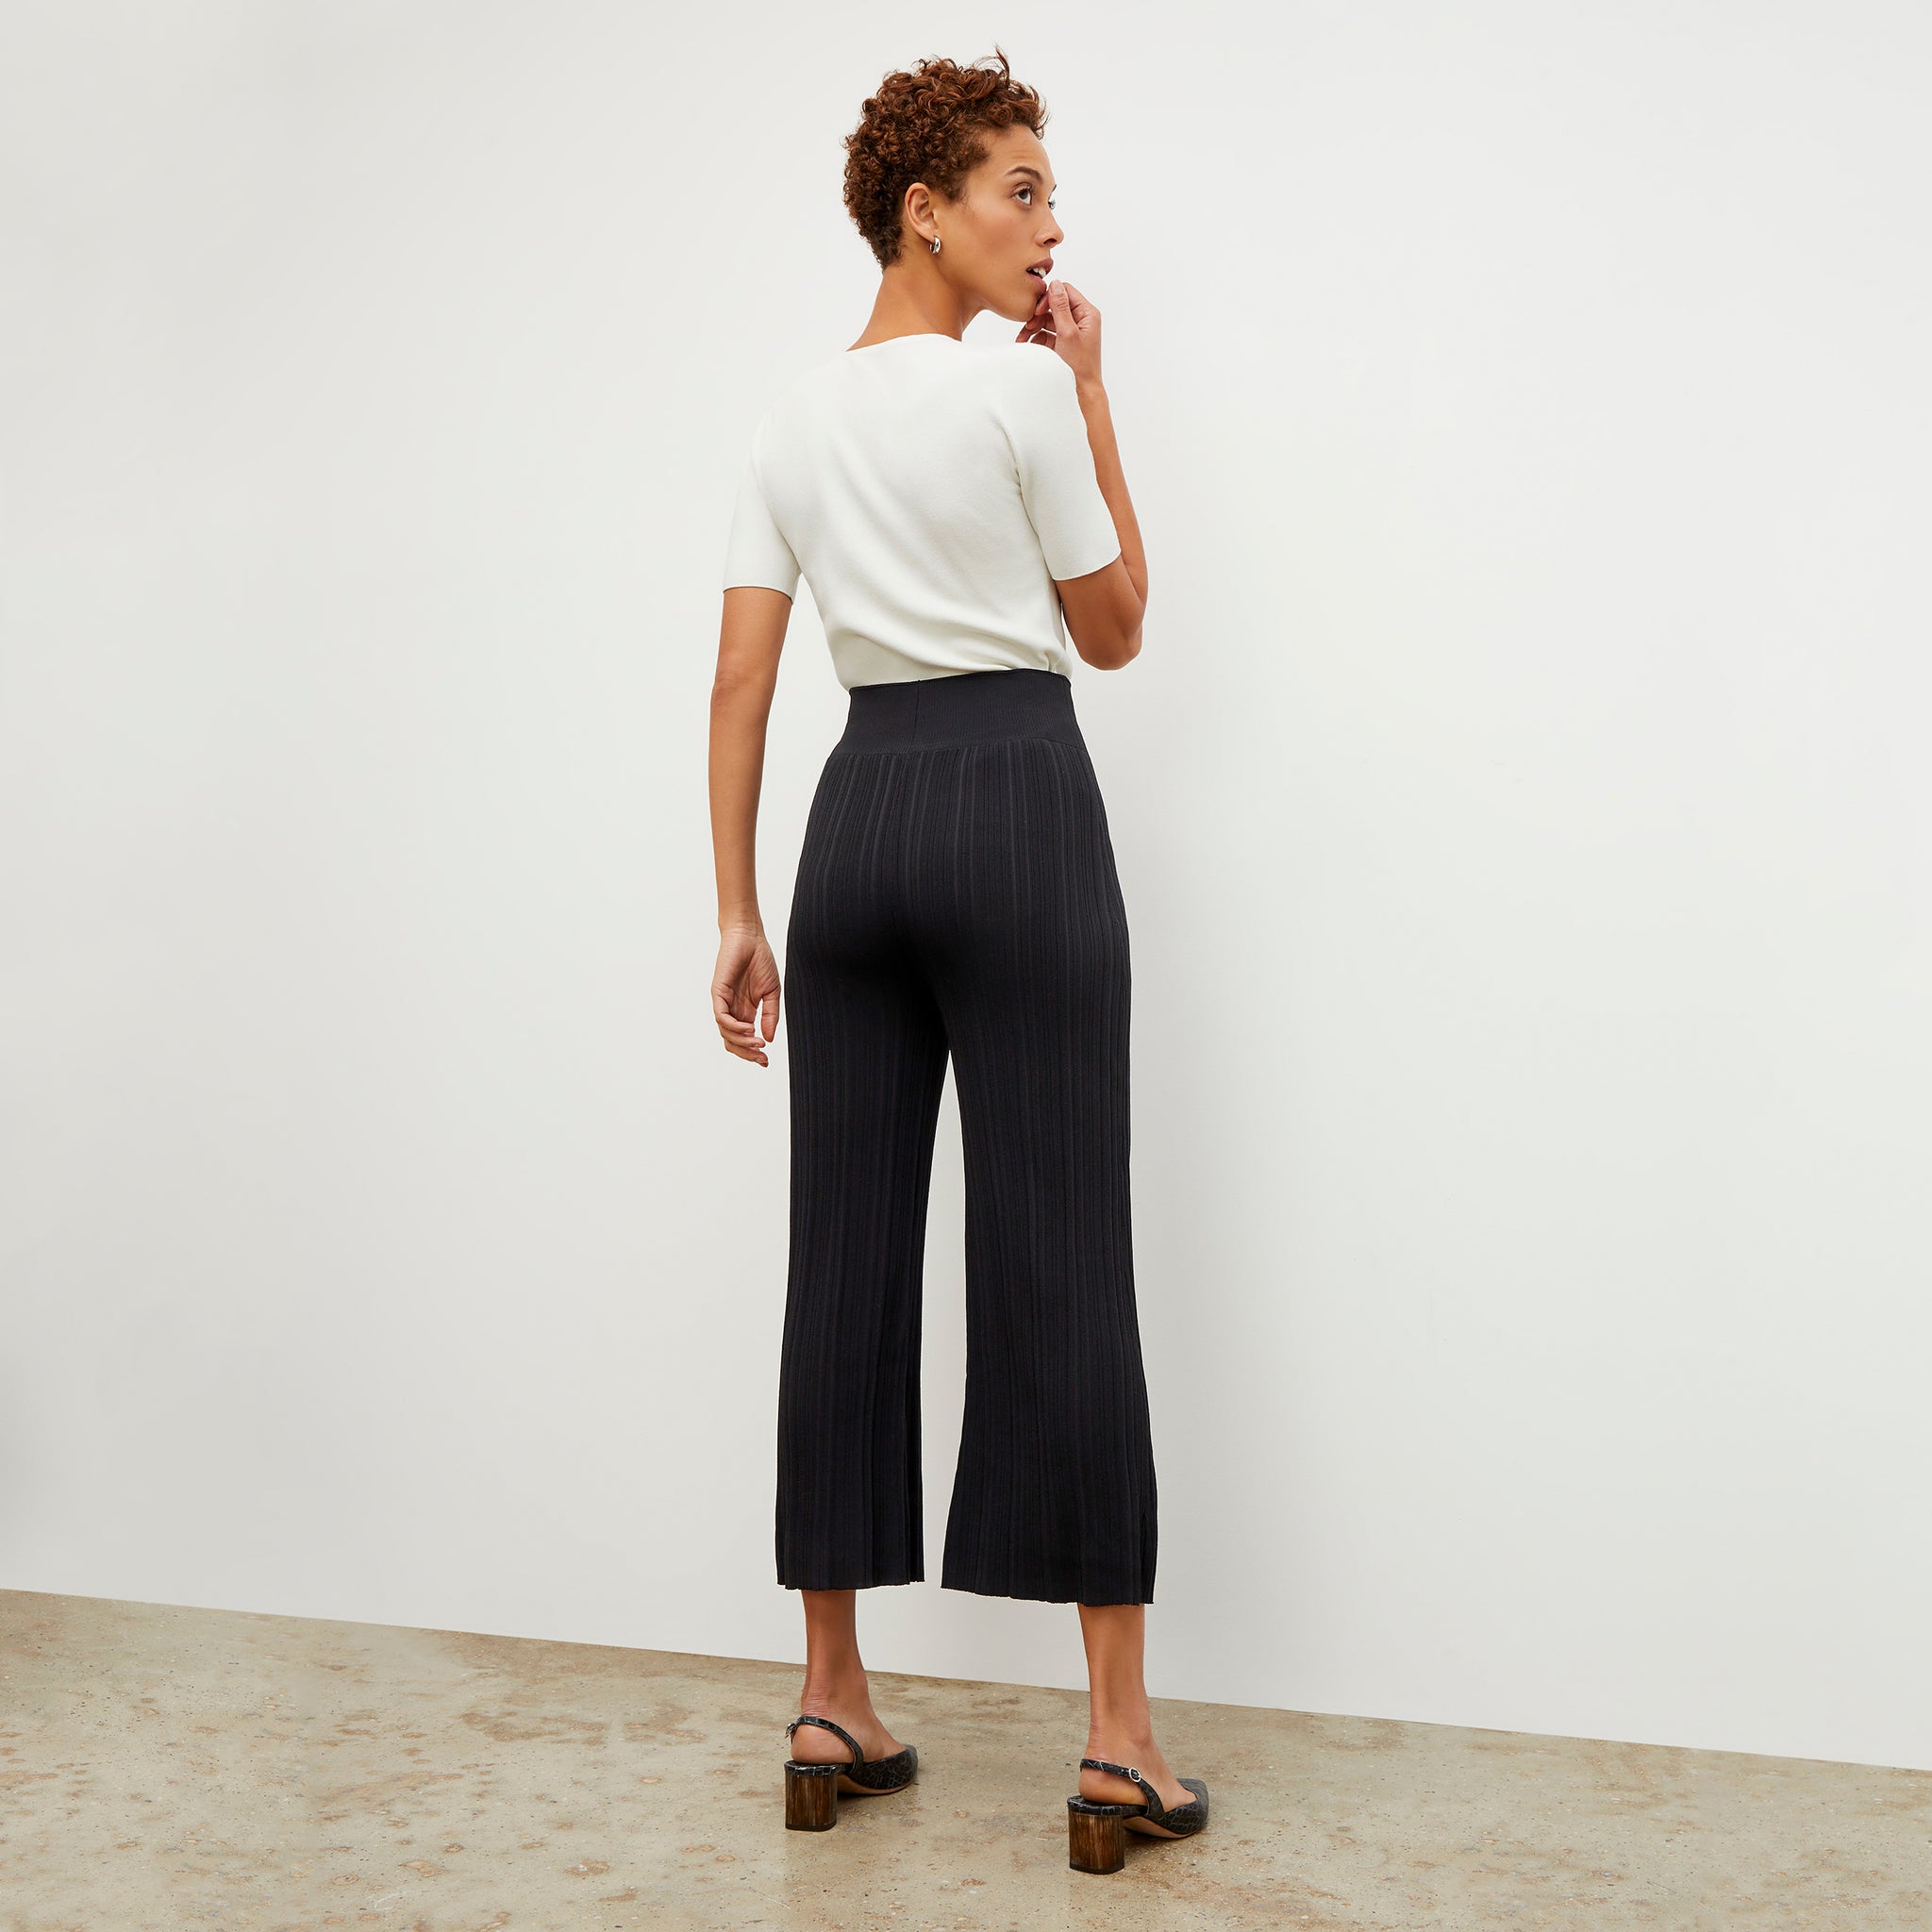 Back image of a woman wearing the Marijane Pant - Textured Knit in Black